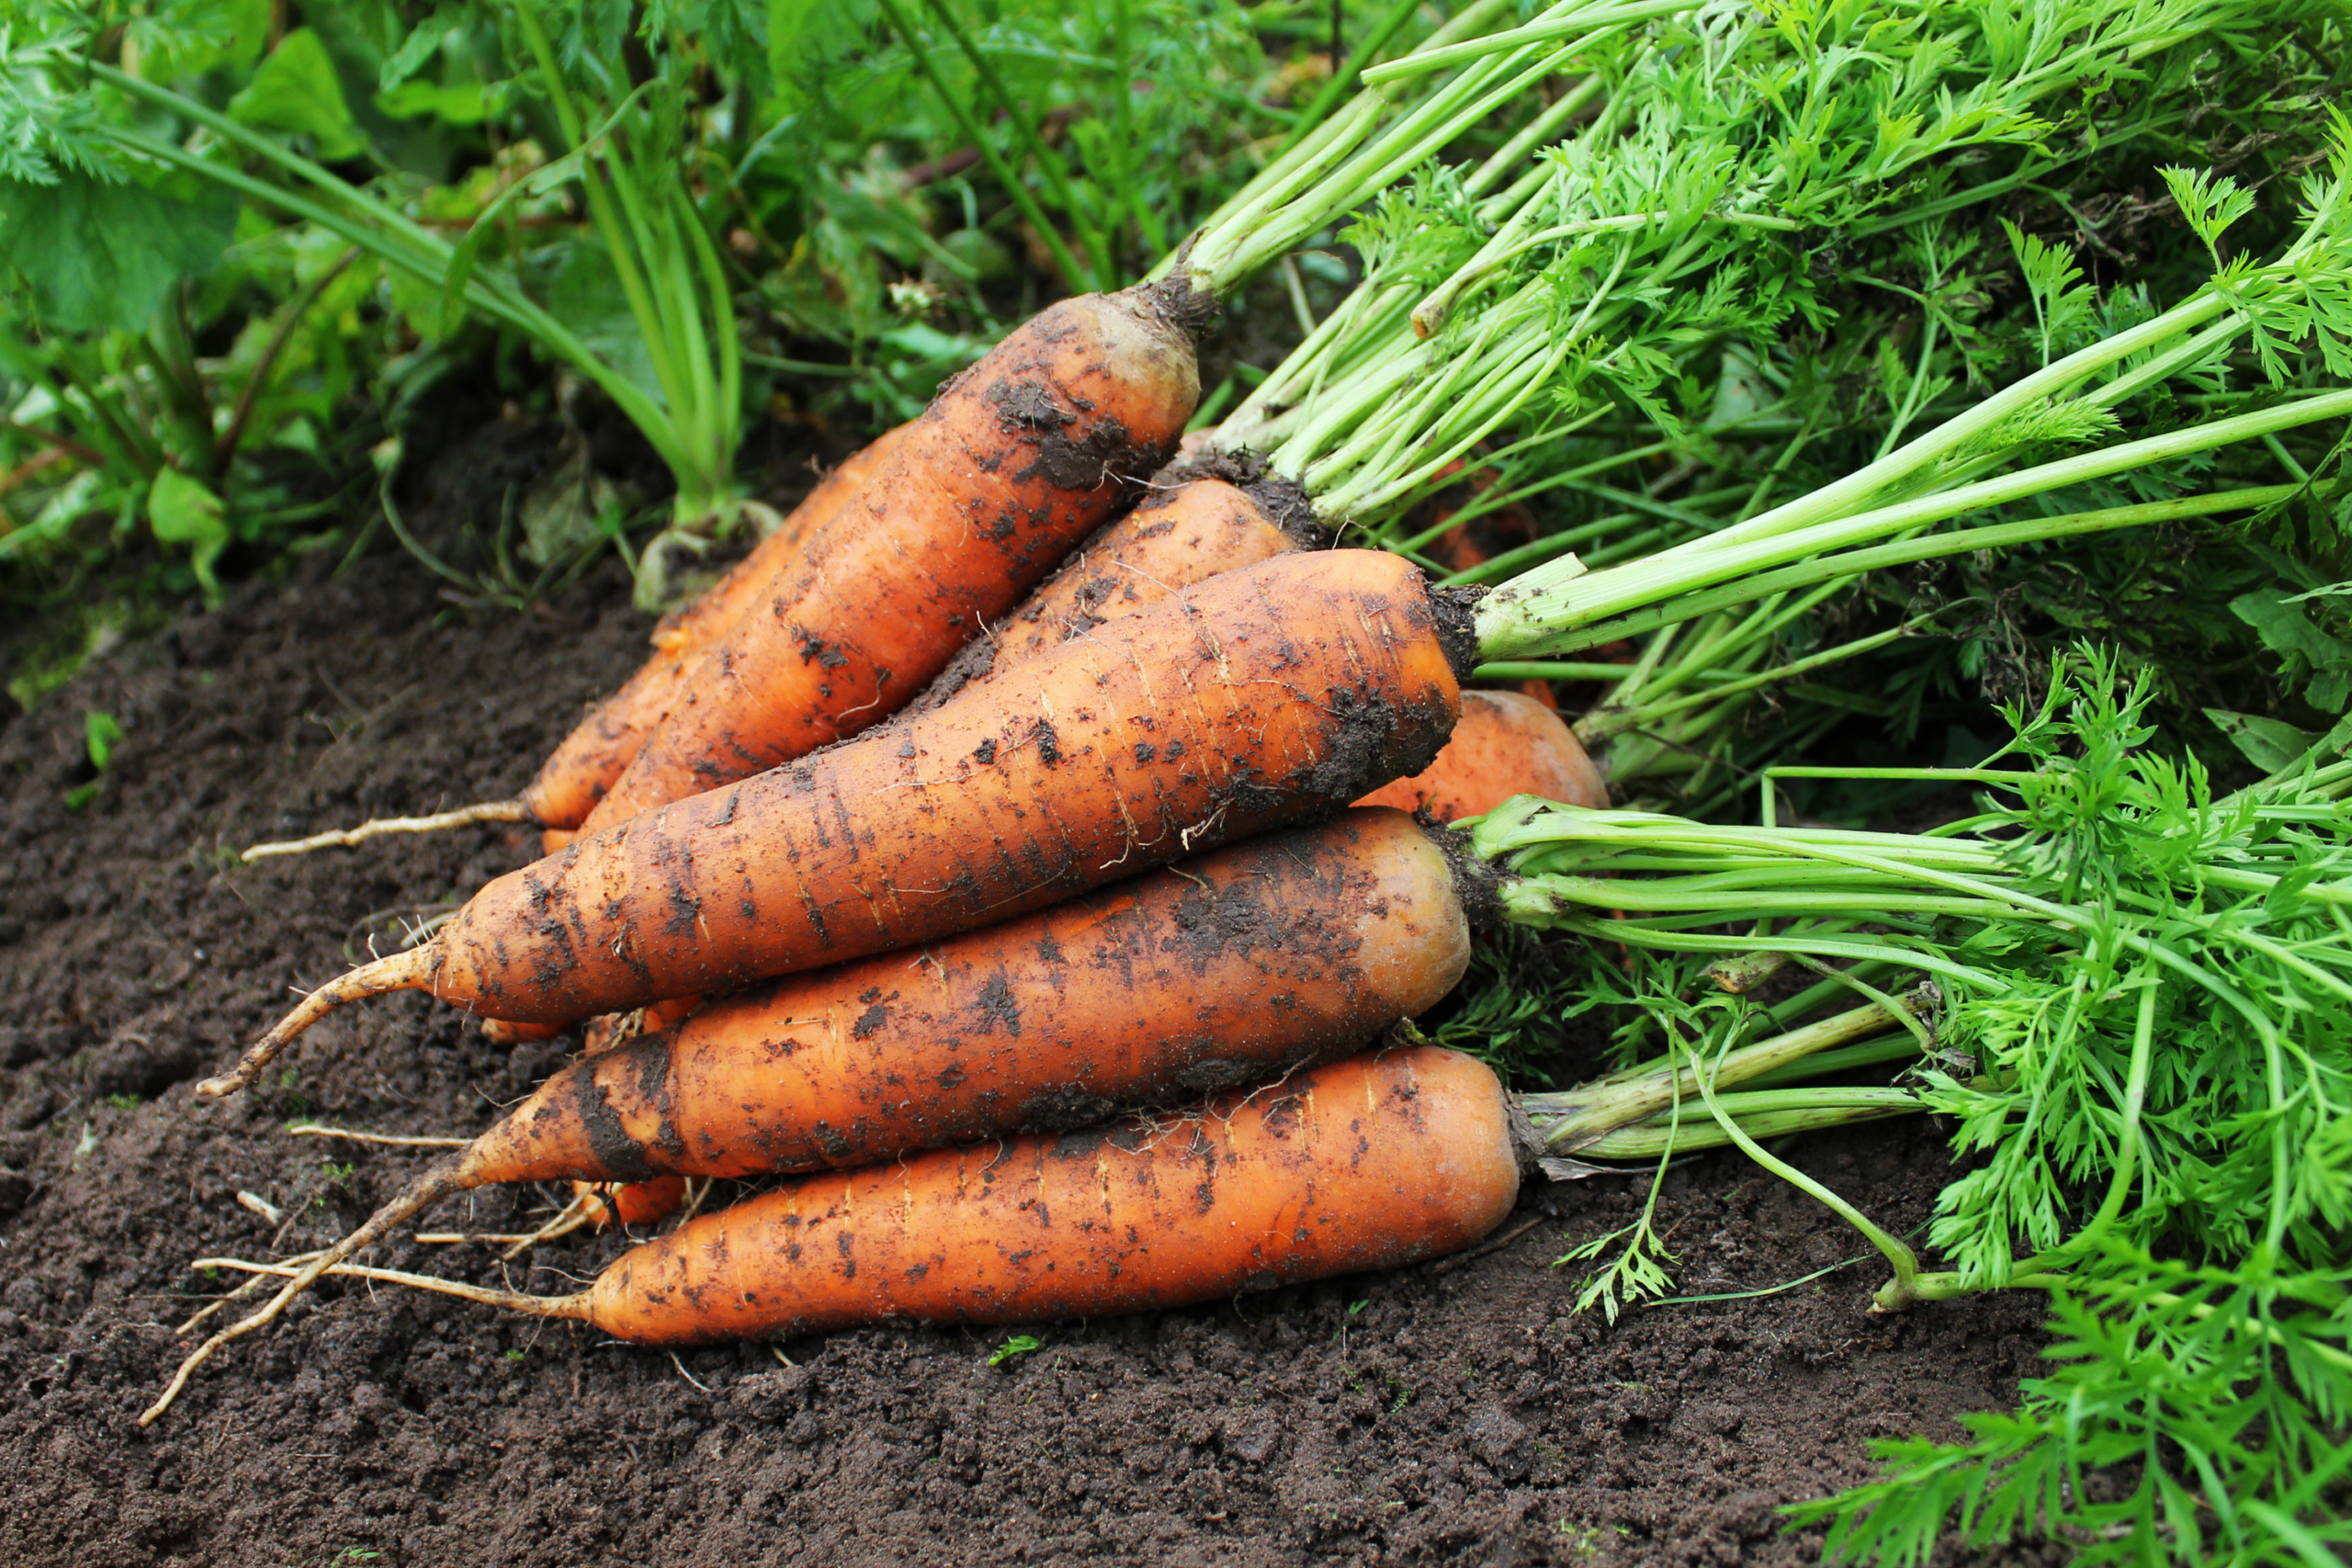  How to harvest carrot seeds now to plant in the spring